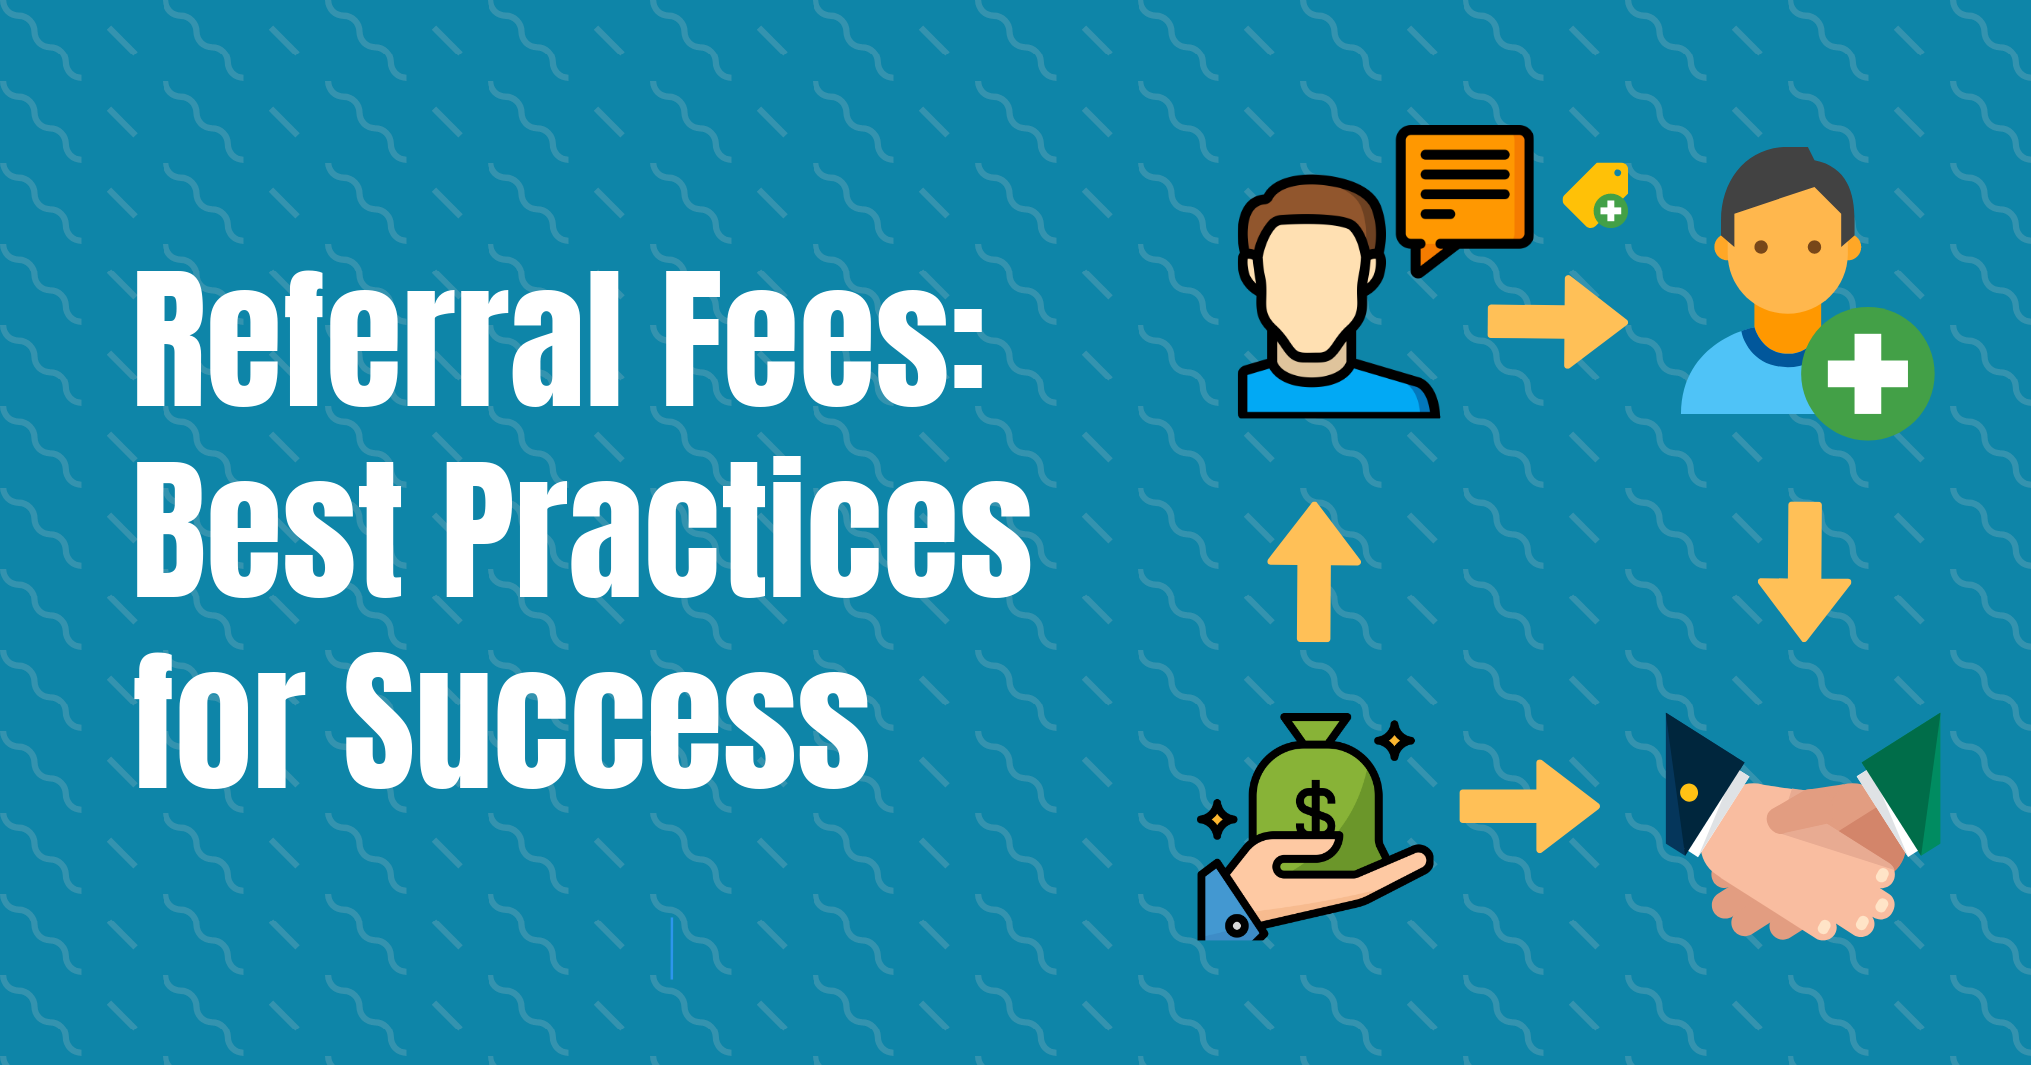 referral-fees-best-practices-for-success